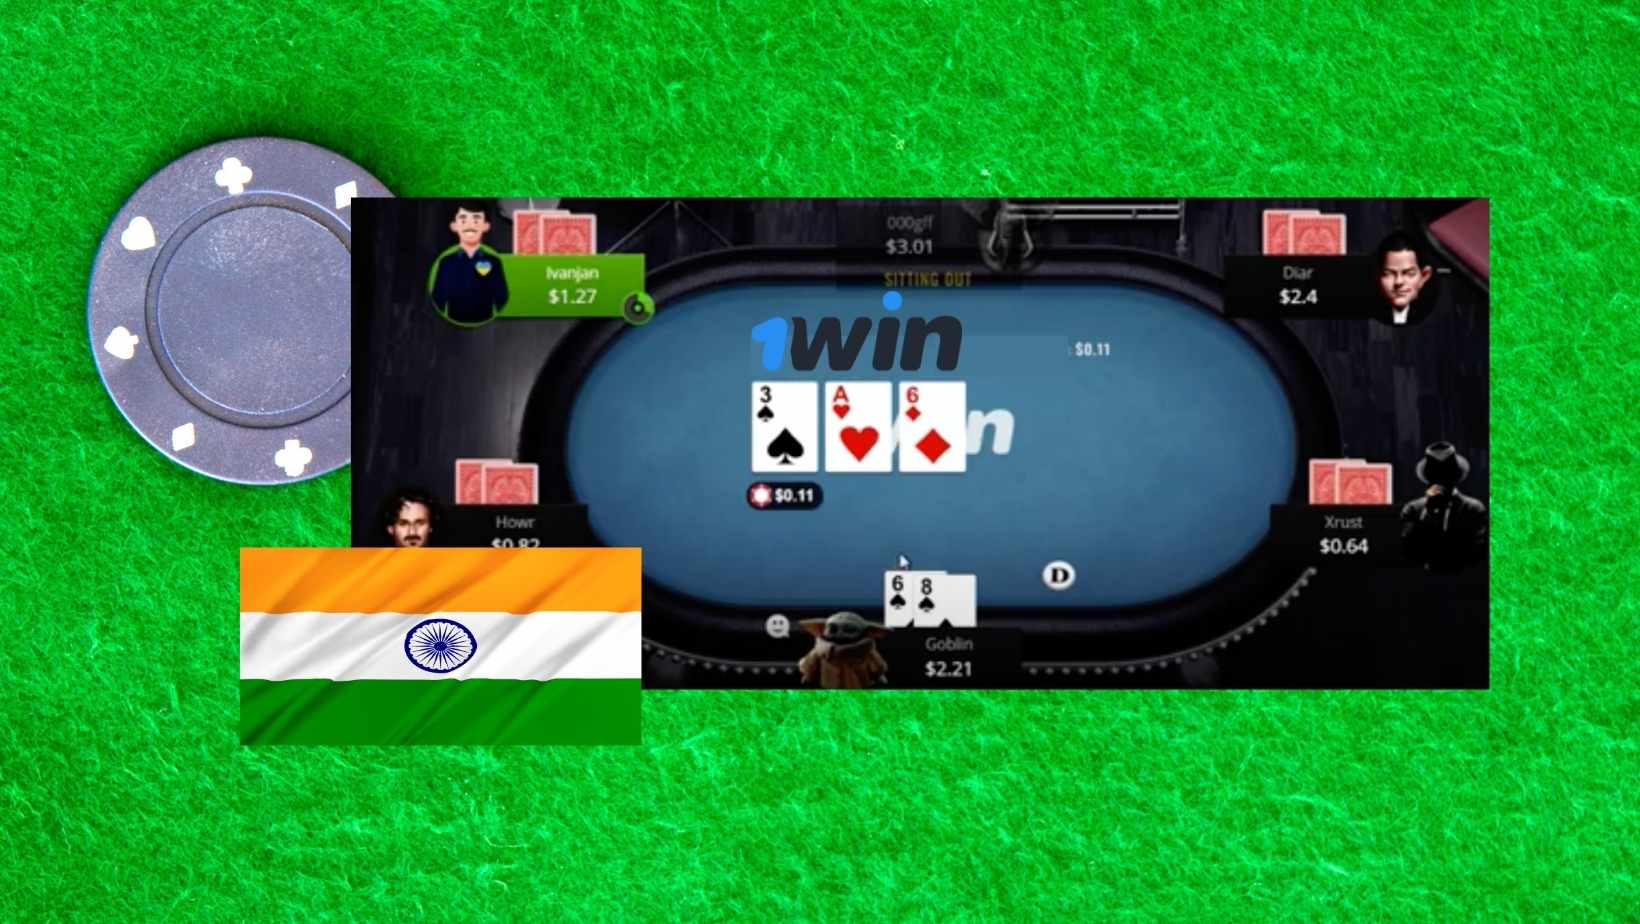 Overview of Poker with Indian bookmaker 1win